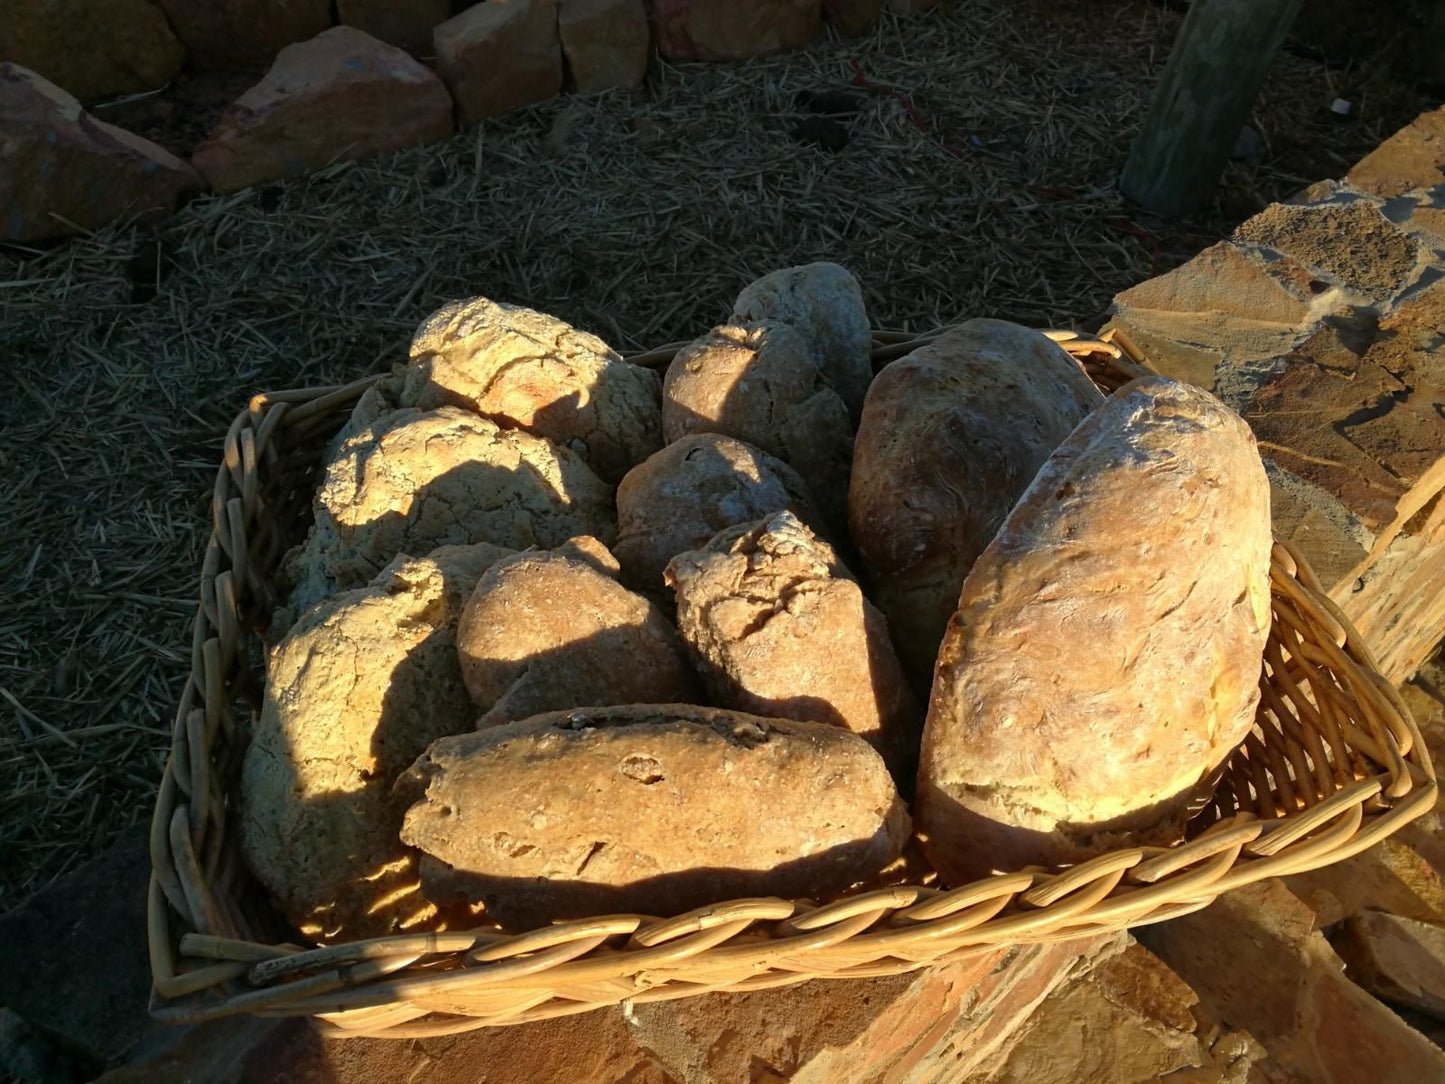 Rangers Reserve Touws River Western Cape South Africa Bread, Bakery Product, Food